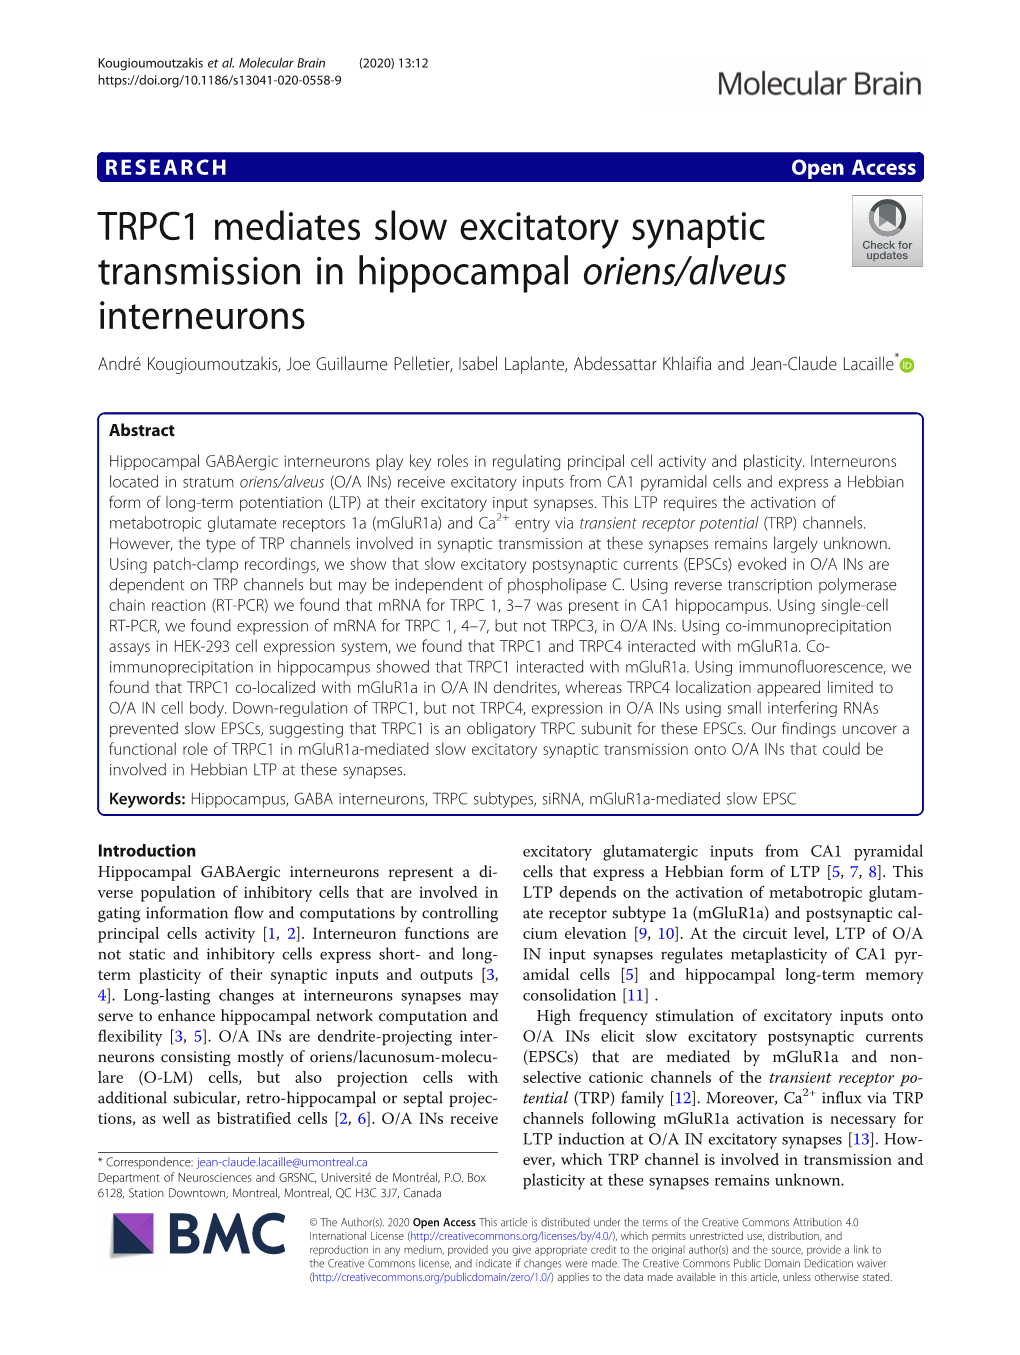 TRPC1 Mediates Slow Excitatory Synaptic Transmission In